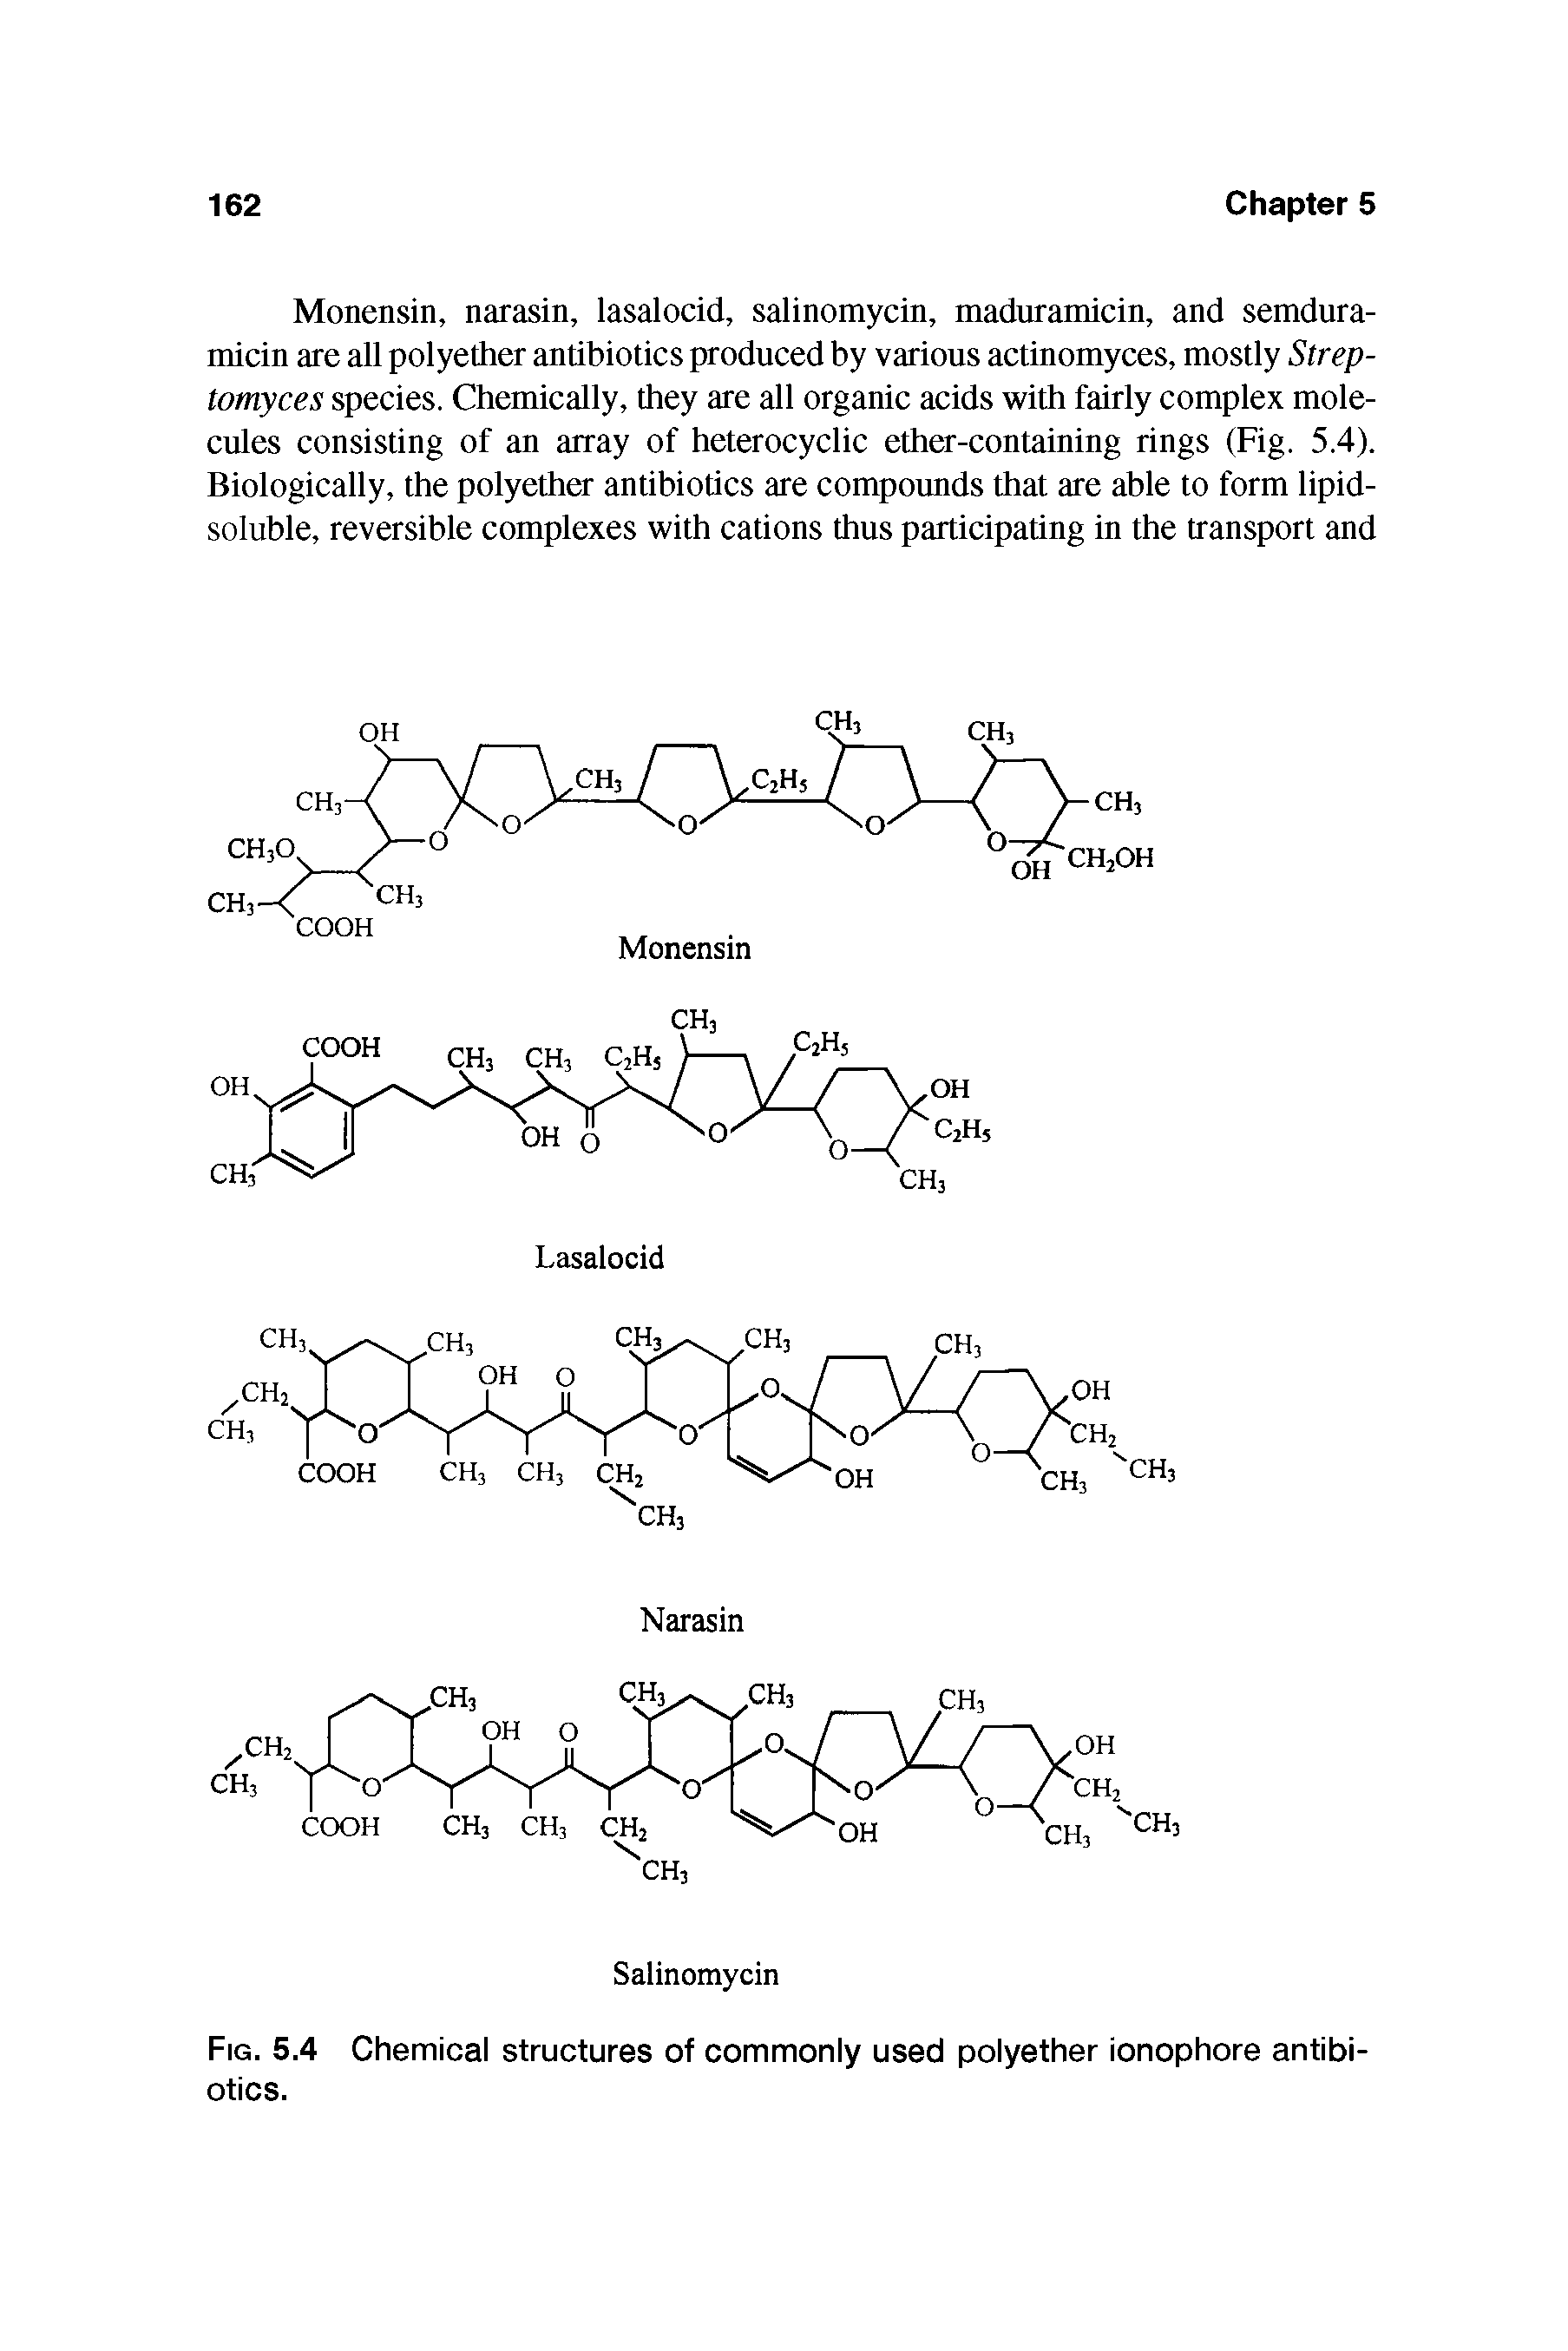 Fig. 5.4 Chemical structures of commonly used polyether ionophore antibiotics.